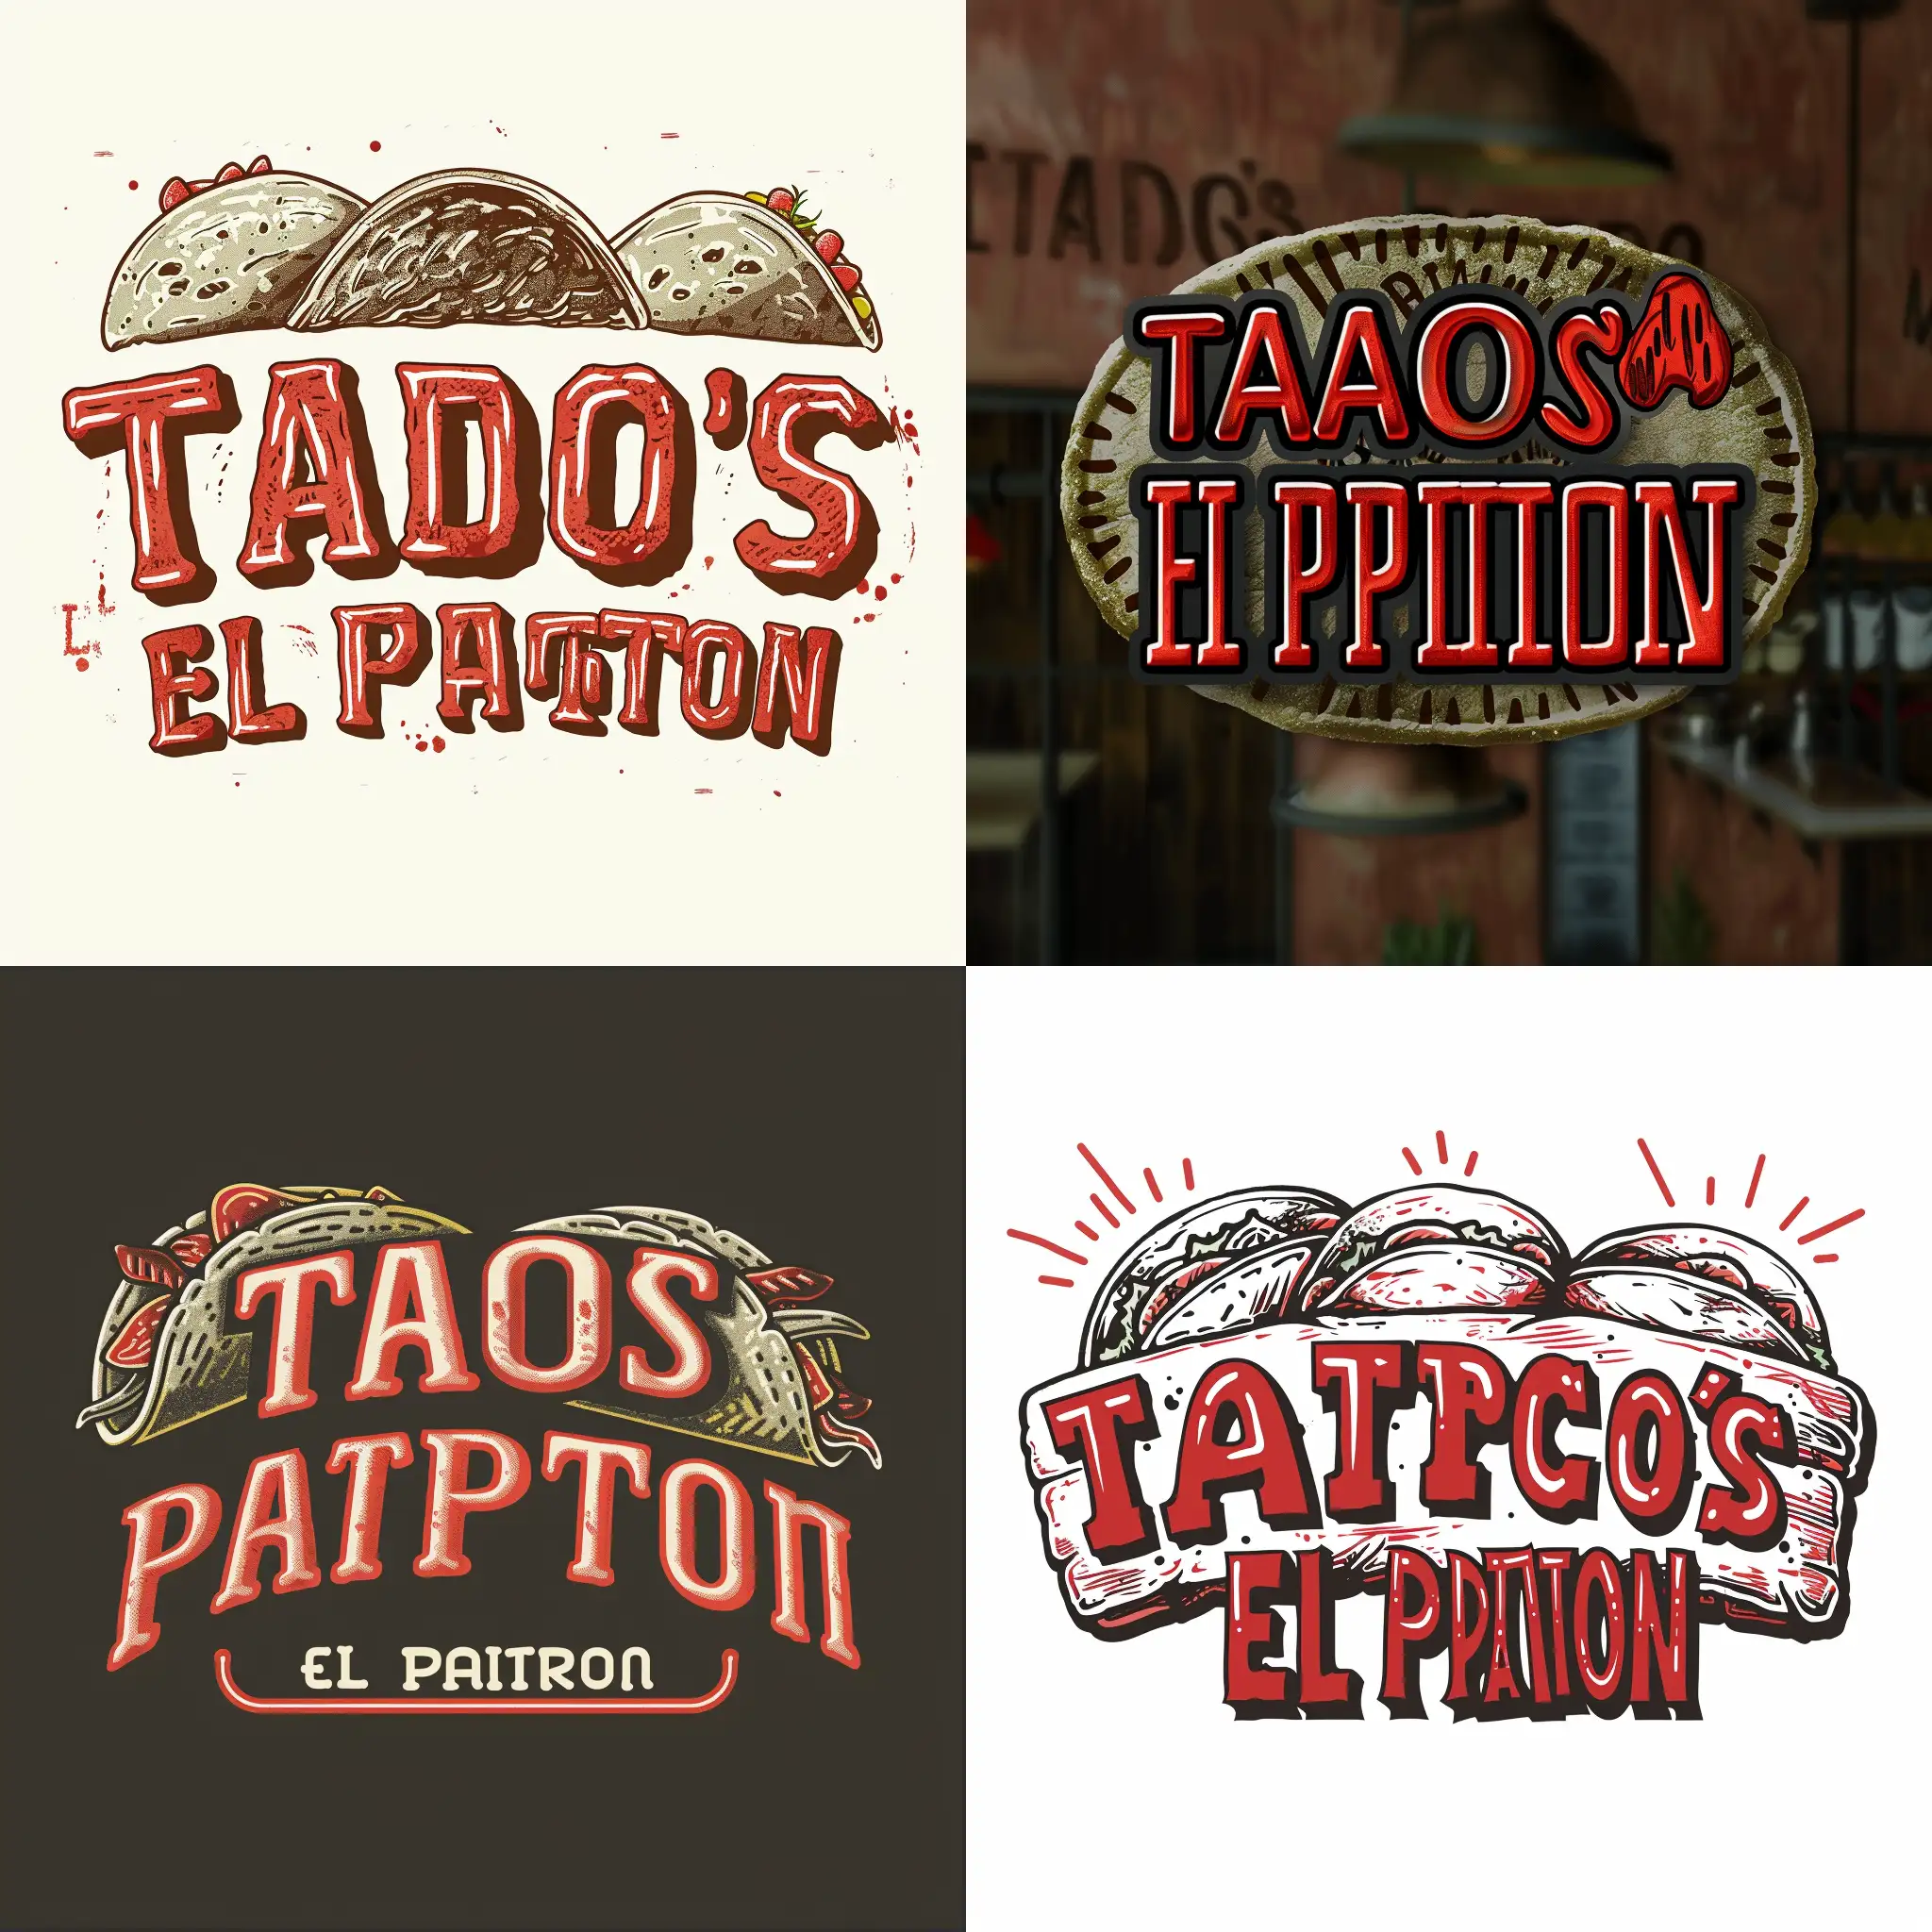 create me a Mexican-style logo with the name "TACOS EL PATRON" in red letters